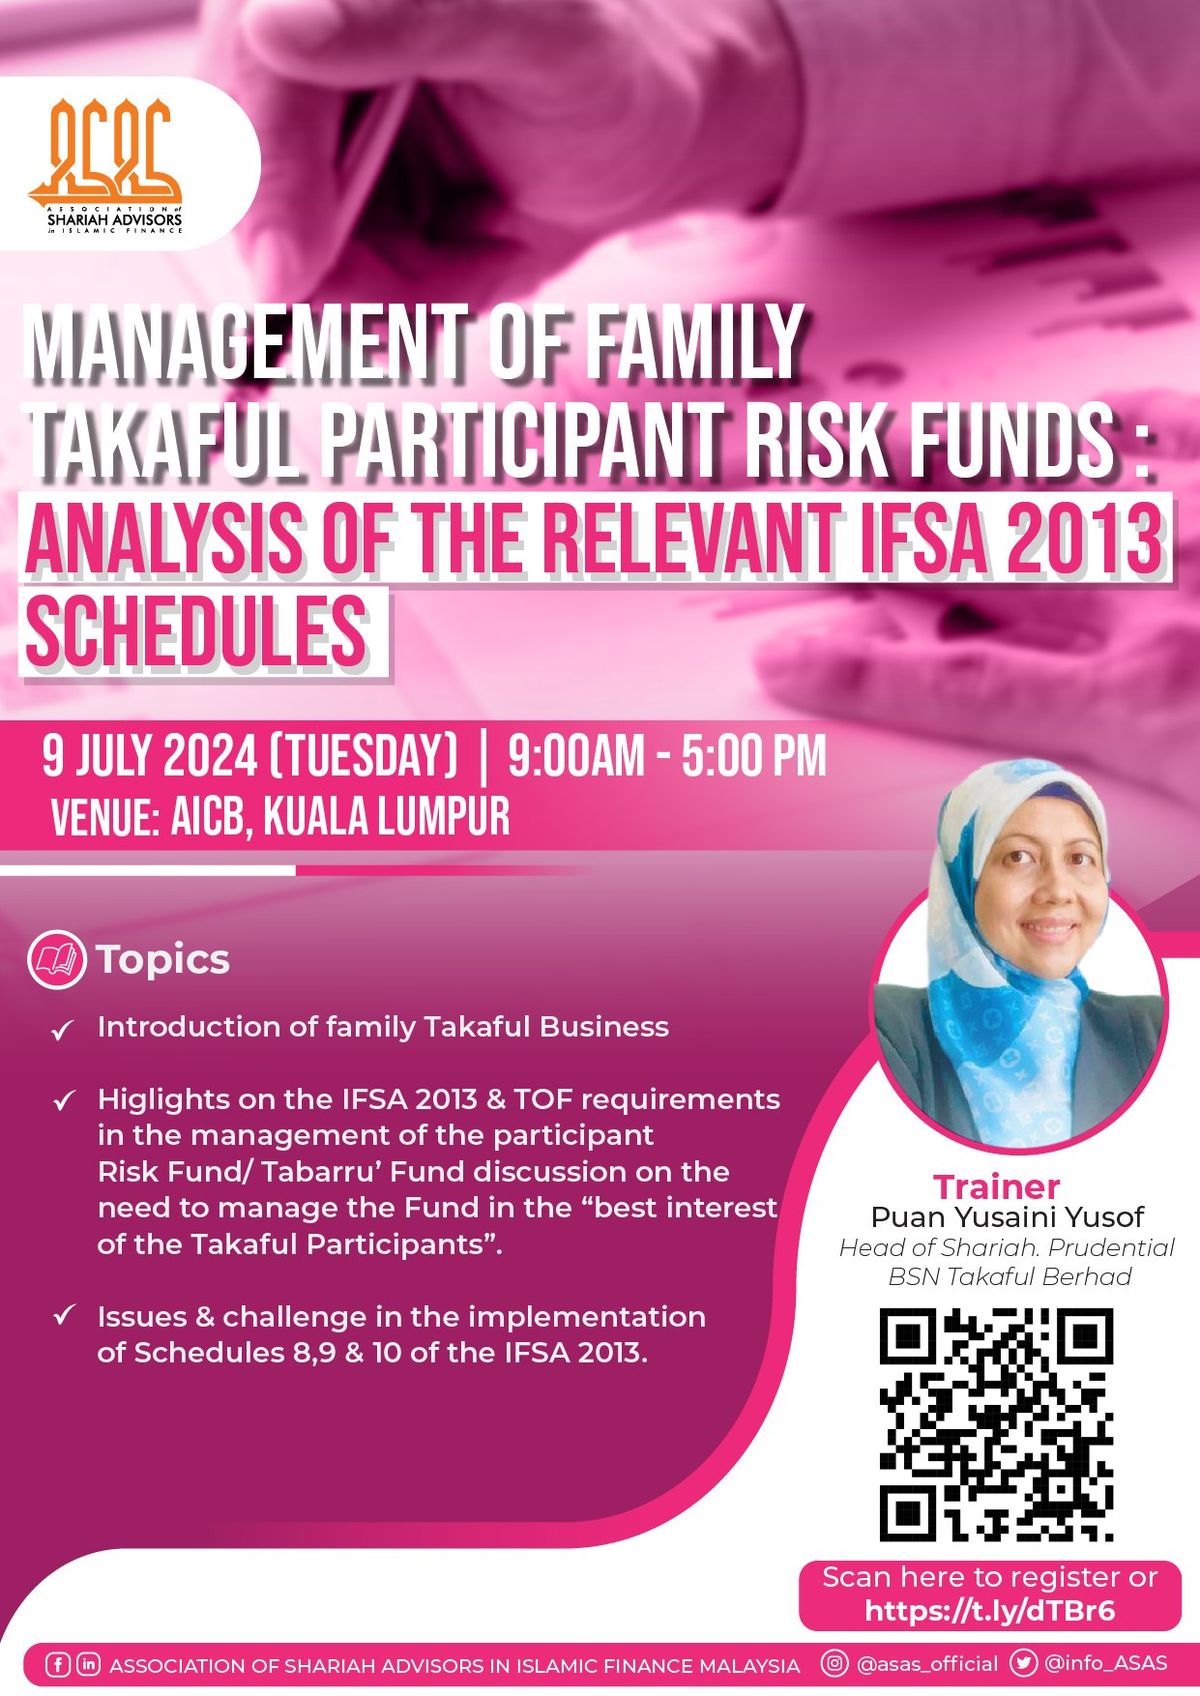 MANAGEMENT OF FAMILY TAKAFUL PARTICIPANT RISK FUNDS: ANALYSIS OF THE RELEVANT IFSA 2013 SCHEDULES.